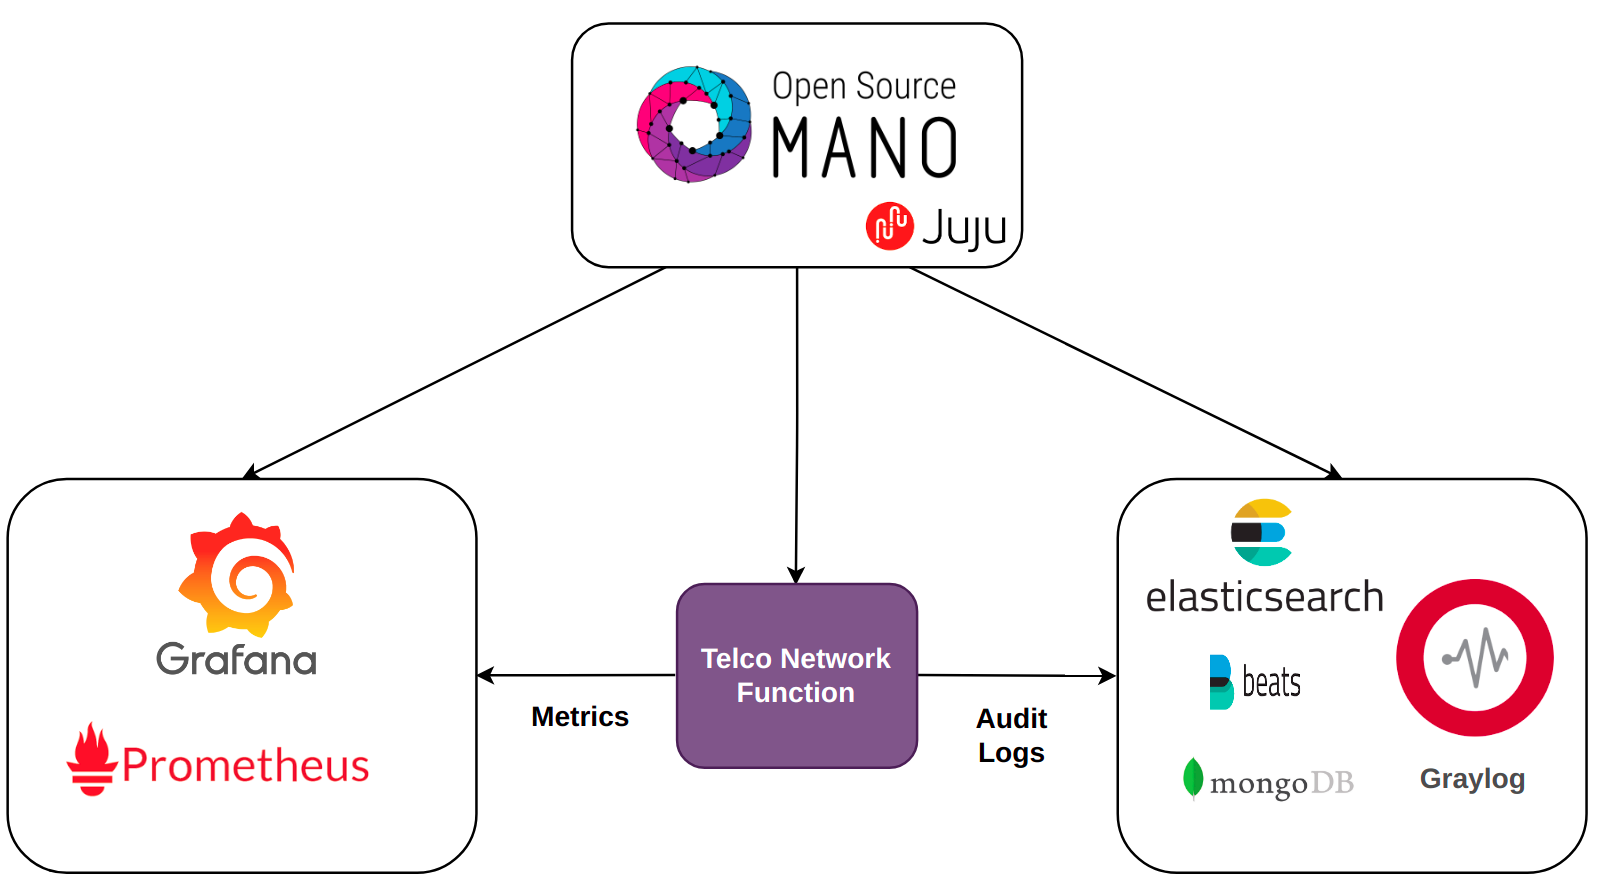 NFV orchestration Network functions auditability with the opensource